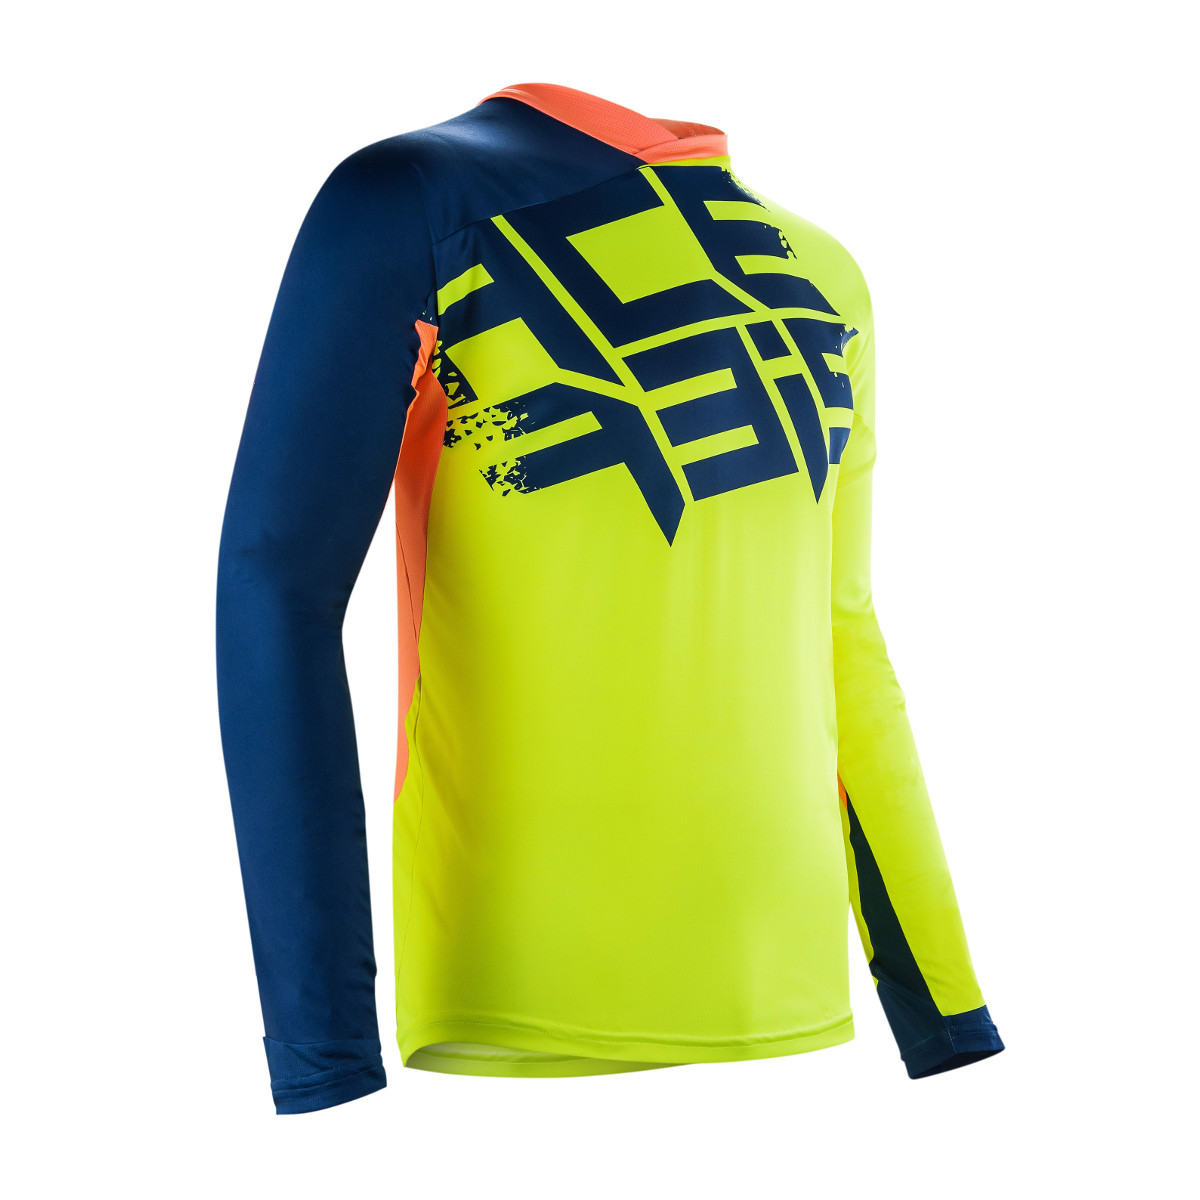 Acerbis Jersey Special Edition Airborne - Fluo Yellow/Blue